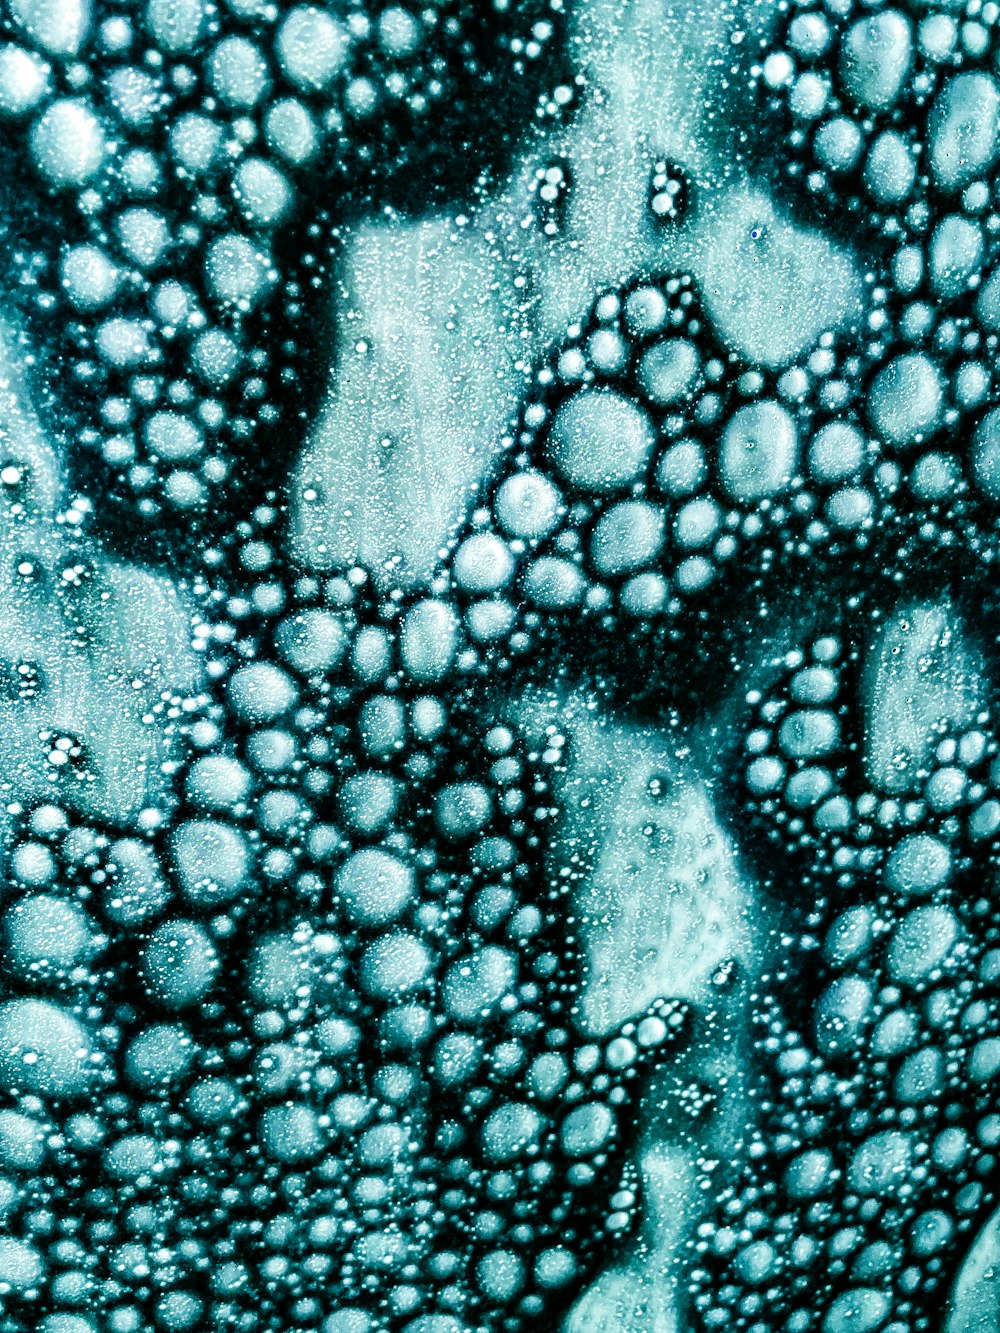 a close up view of water bubbles on a surface